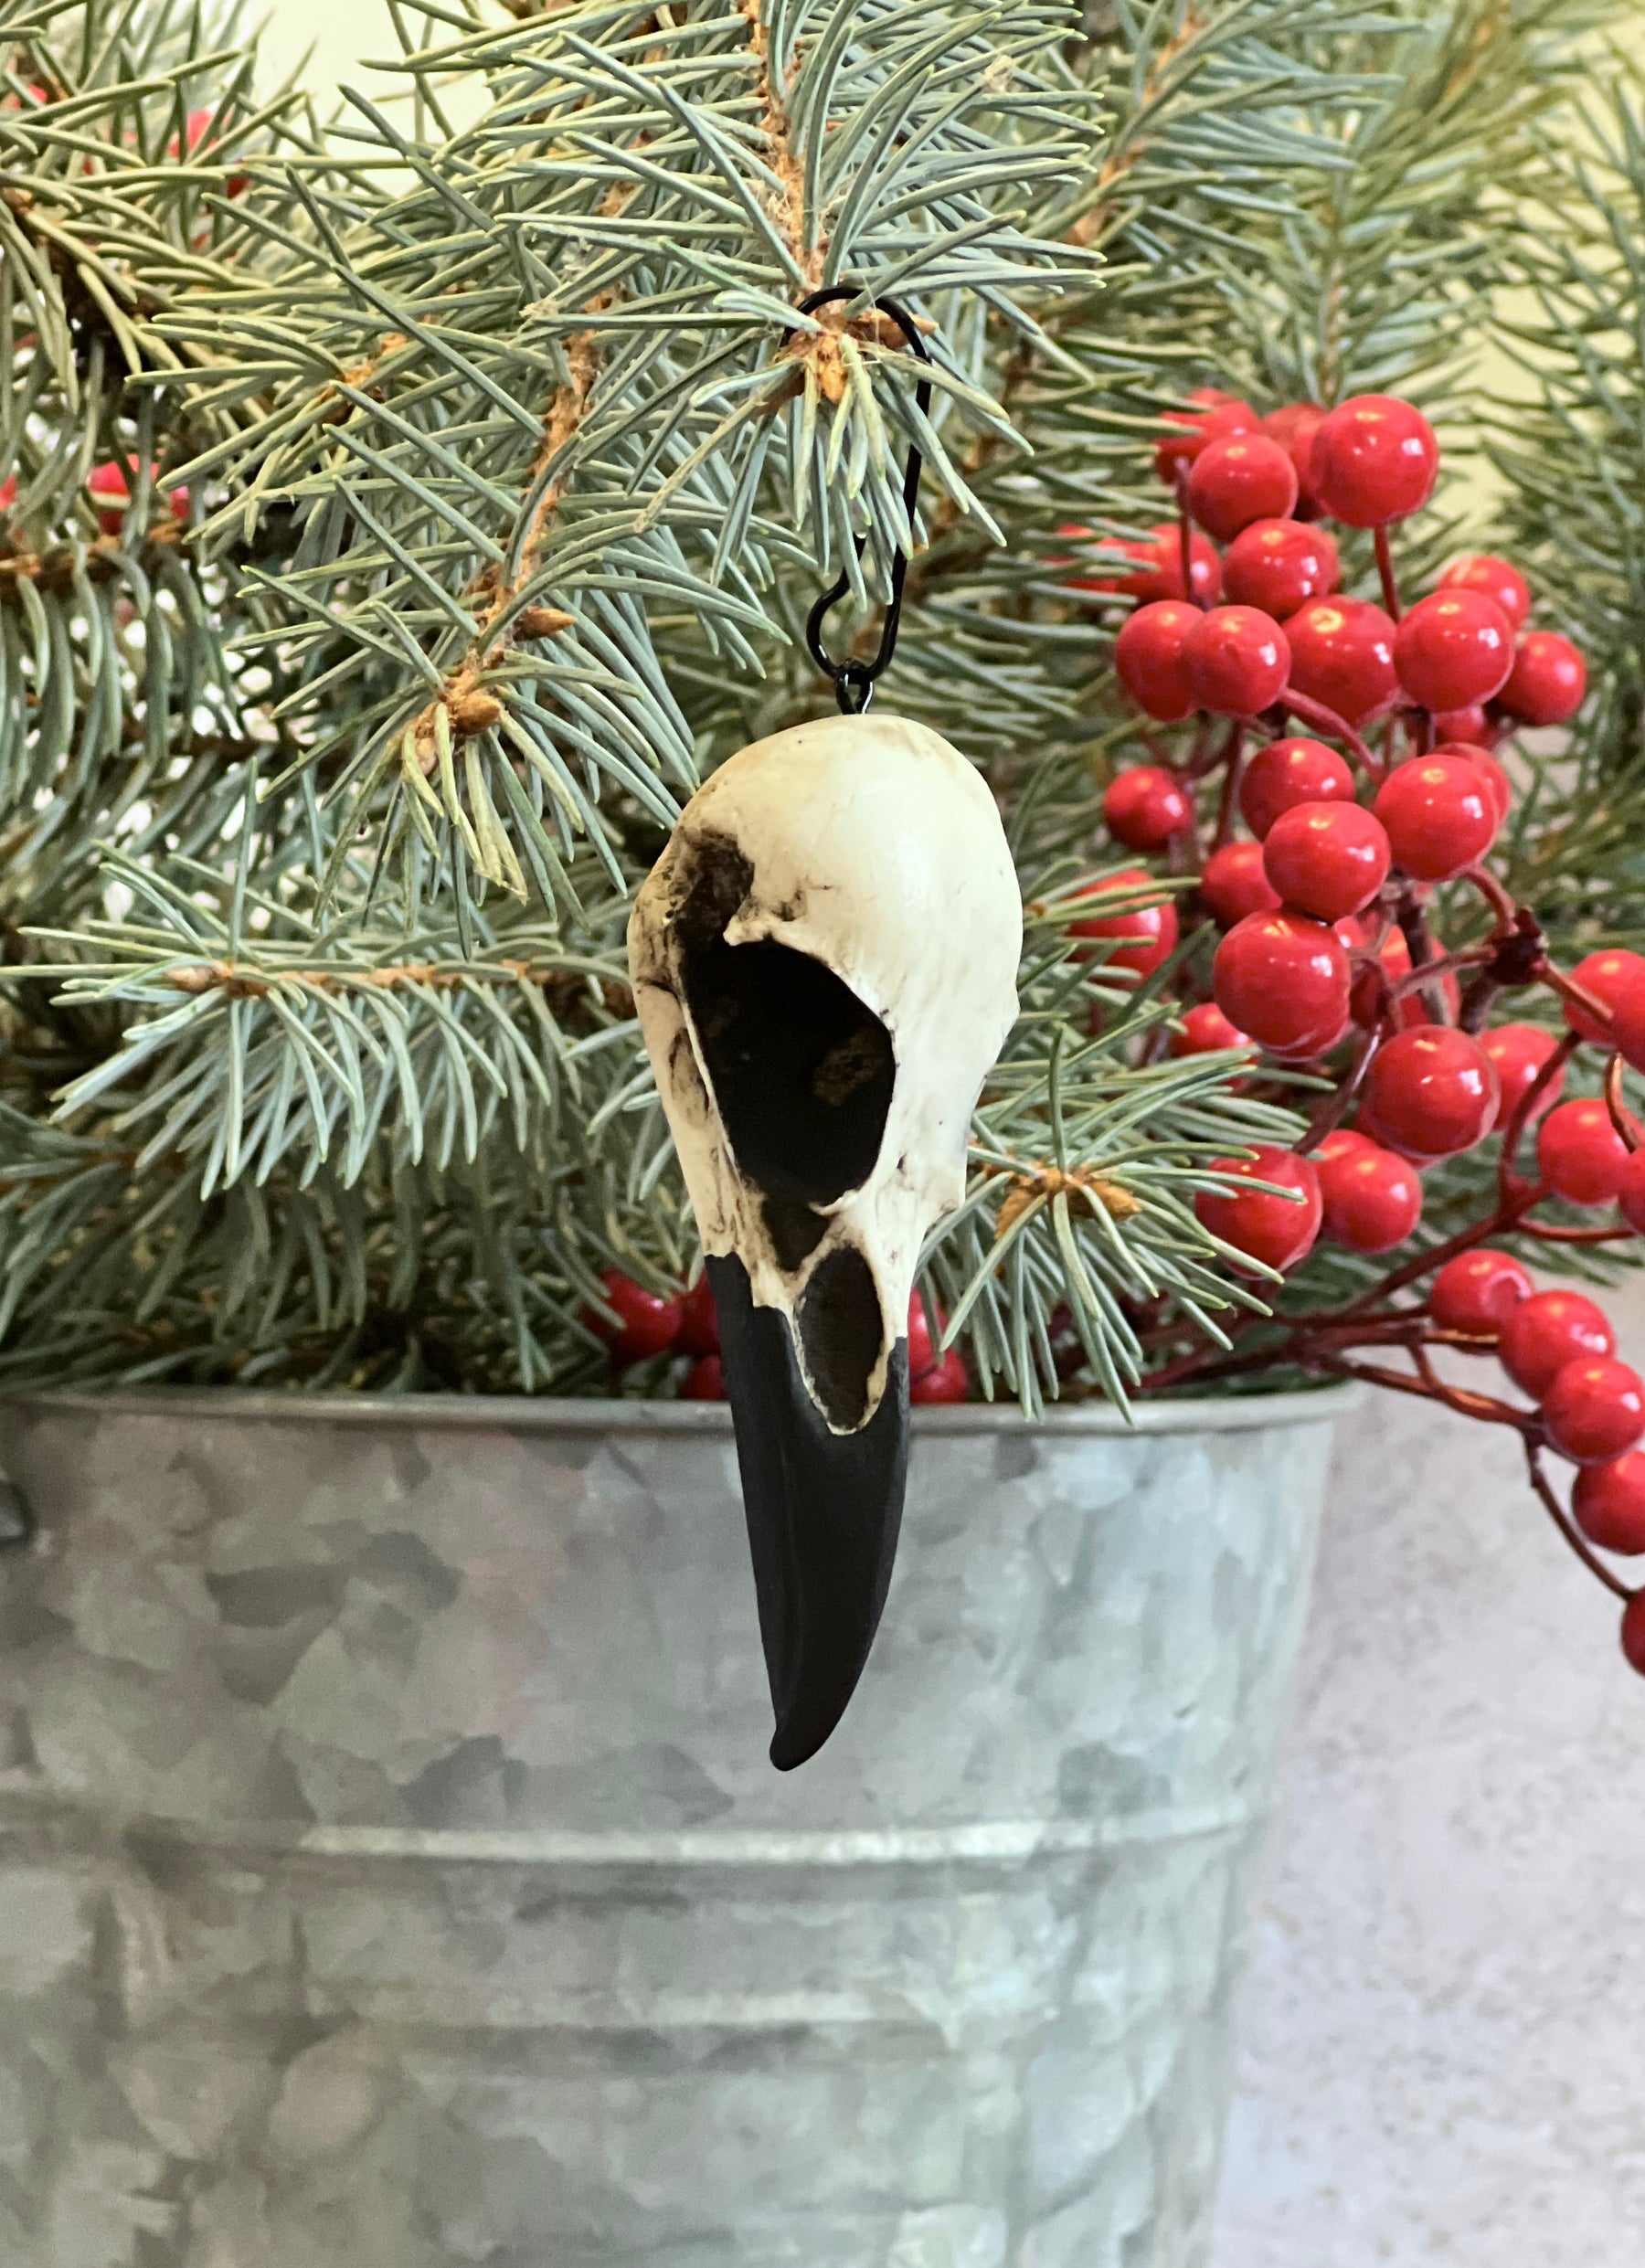 Gothic home decor raven skull holiday nightmare before Christmas tree ornament yule gift for pagans, wiccans, witches and goths.